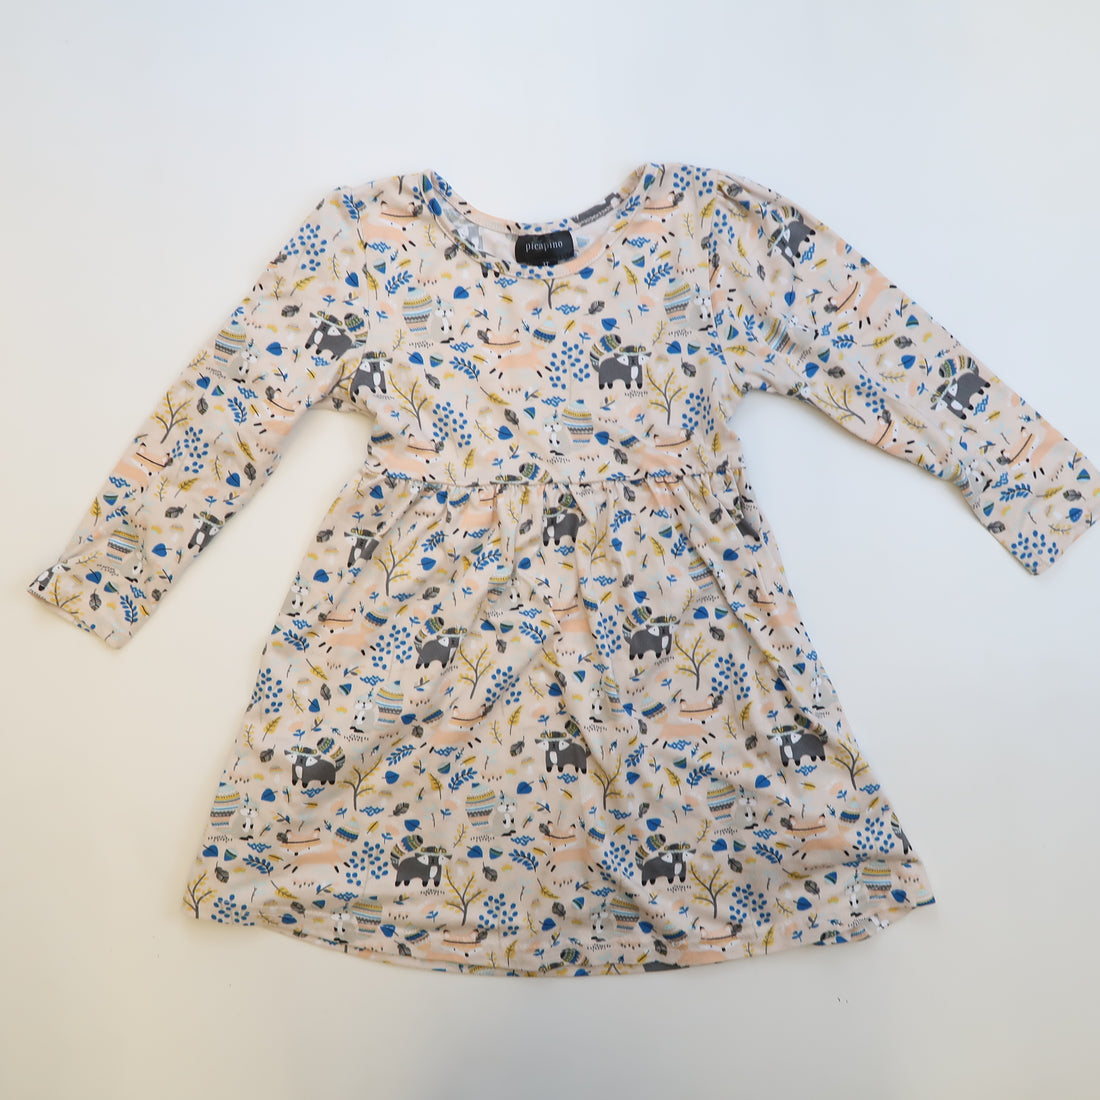 Picapino - Dress (3T)